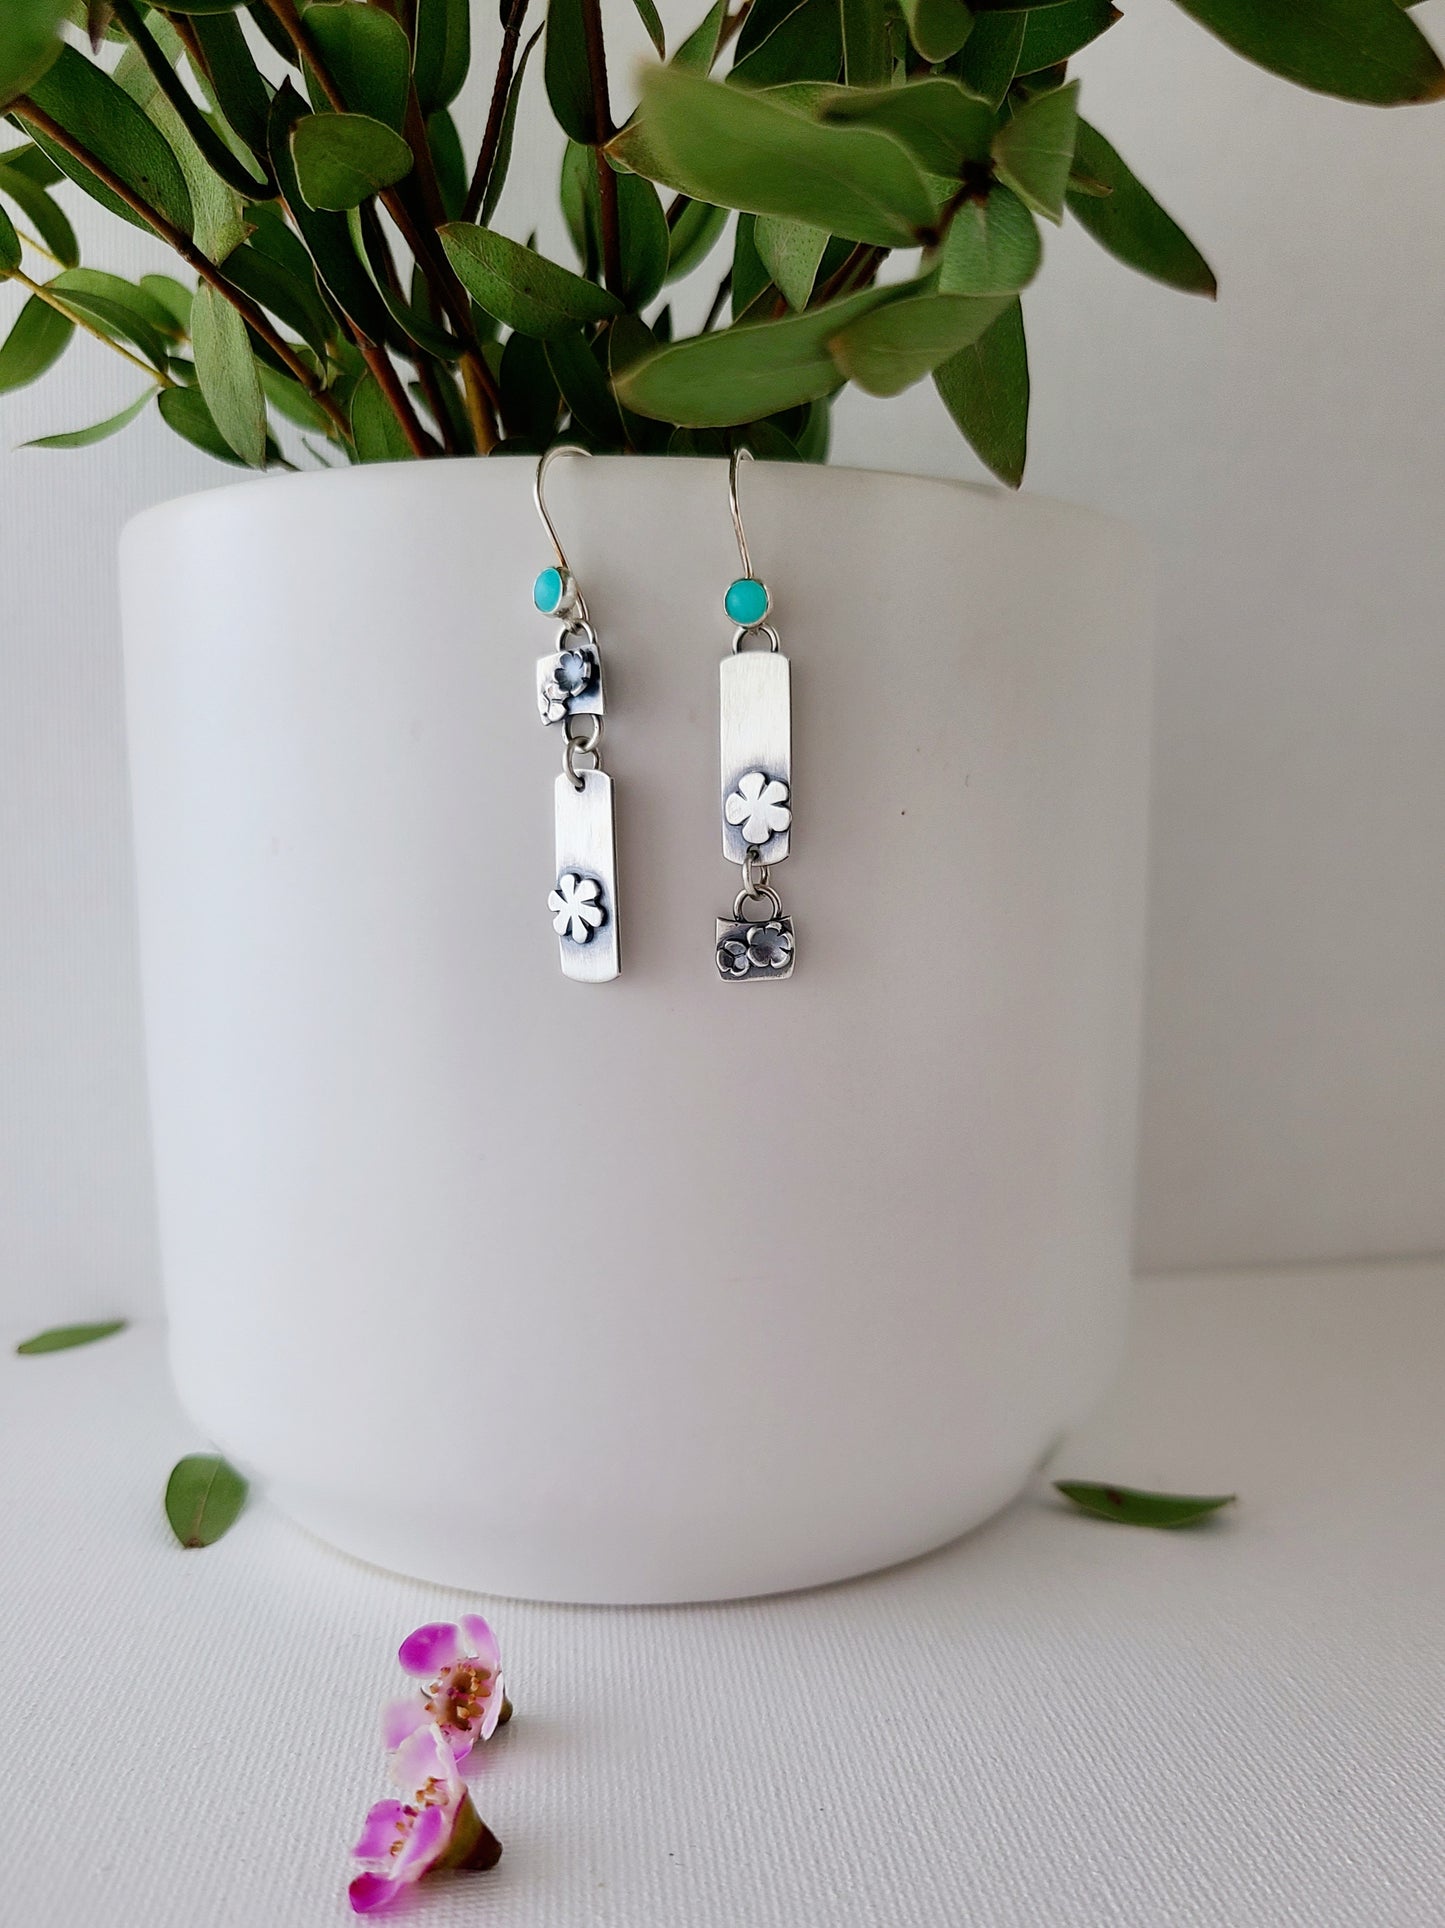 Blossom earrings-2 Tier rectangles with Amazonite